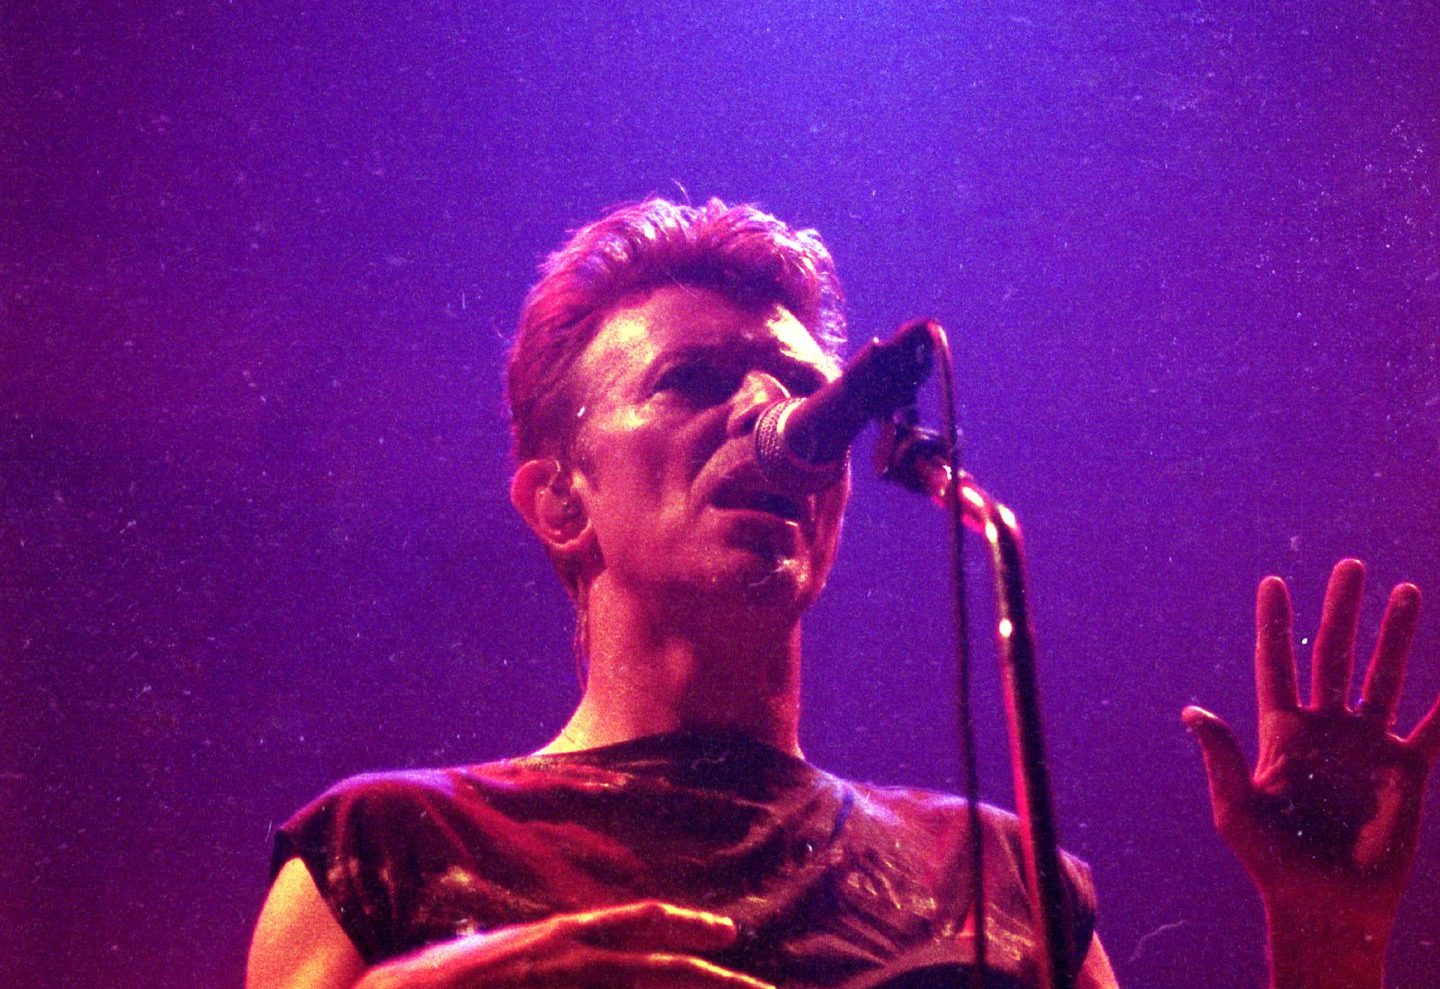 David Bowie performing at the AECC in November 1995.